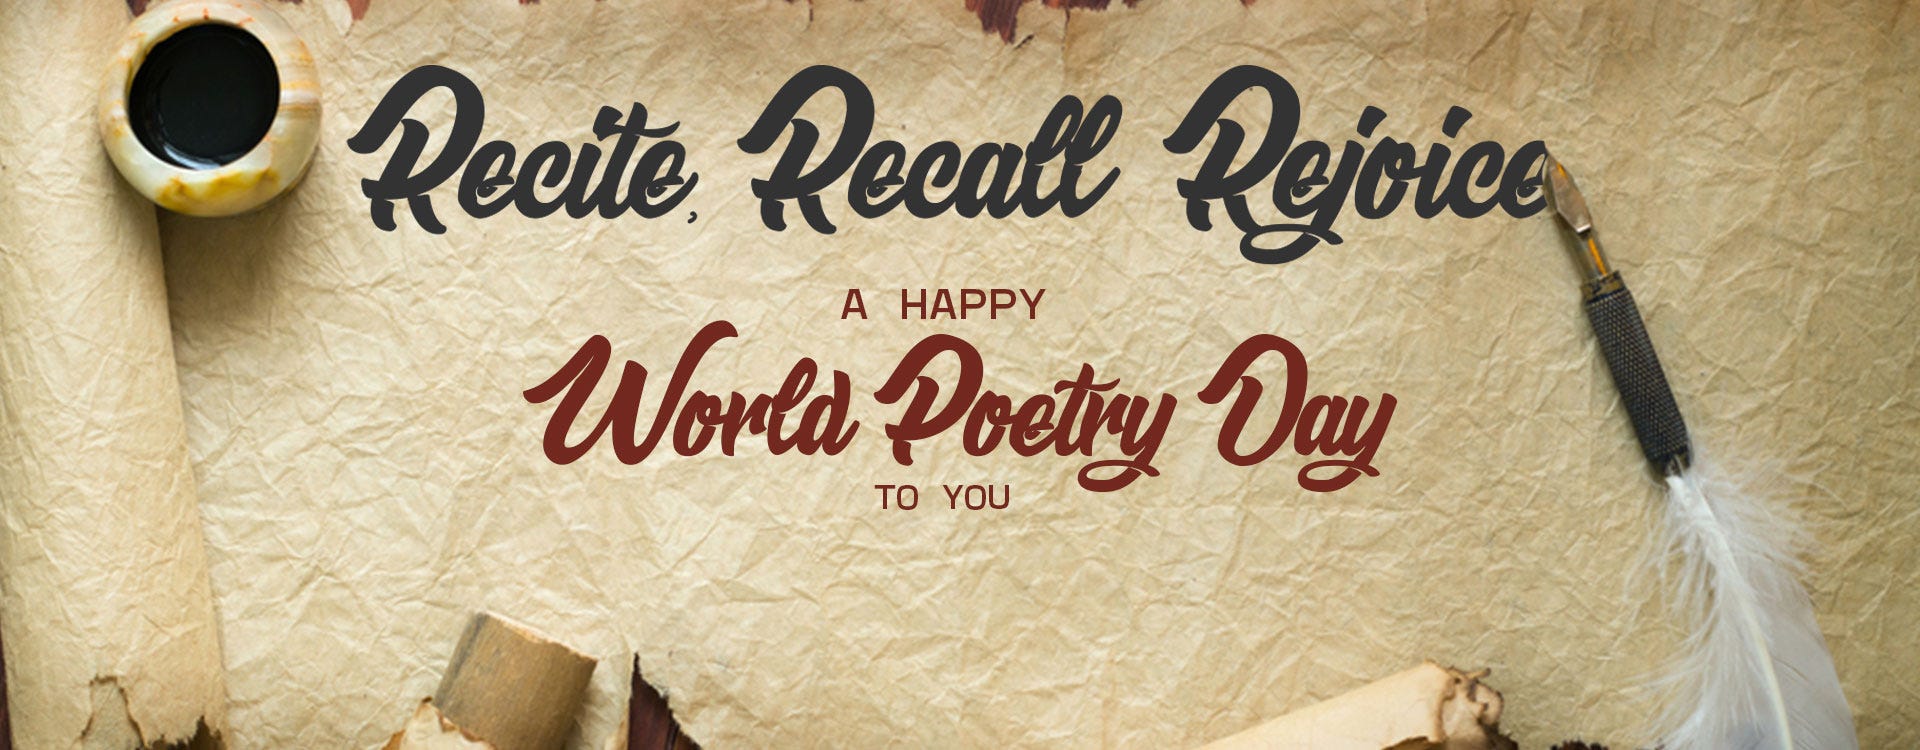 Recite, Recall & Rejoice - A Happy World Poetry Day To You